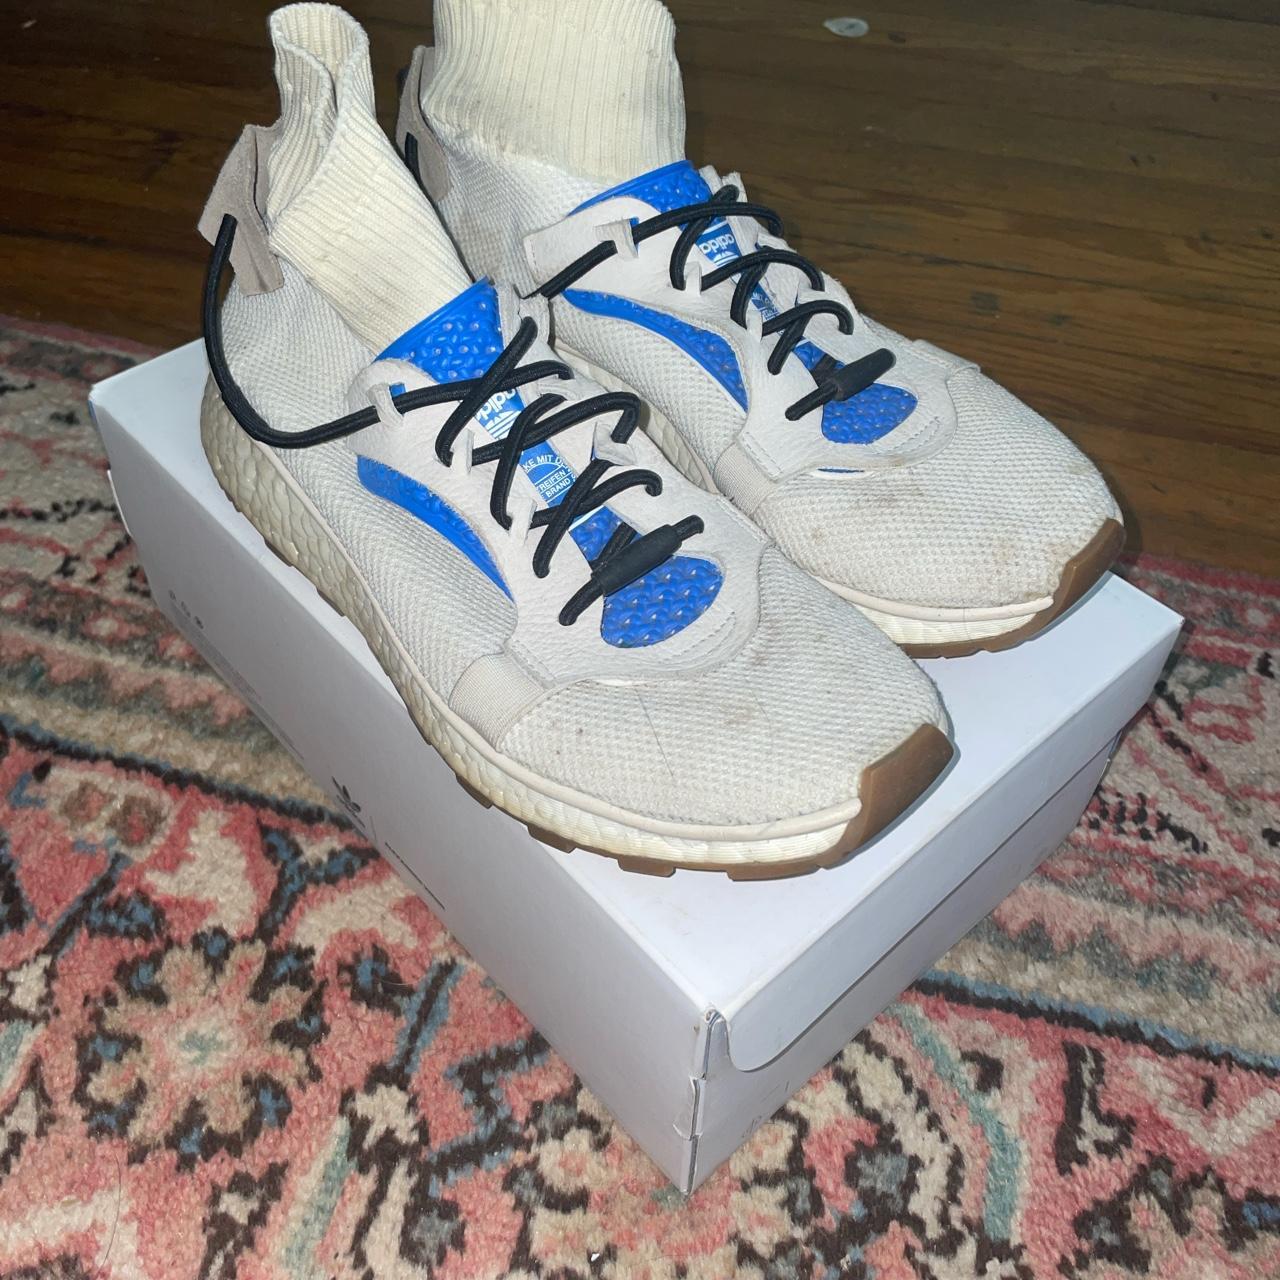 Alexander Wang Men's White and Blue Trainers